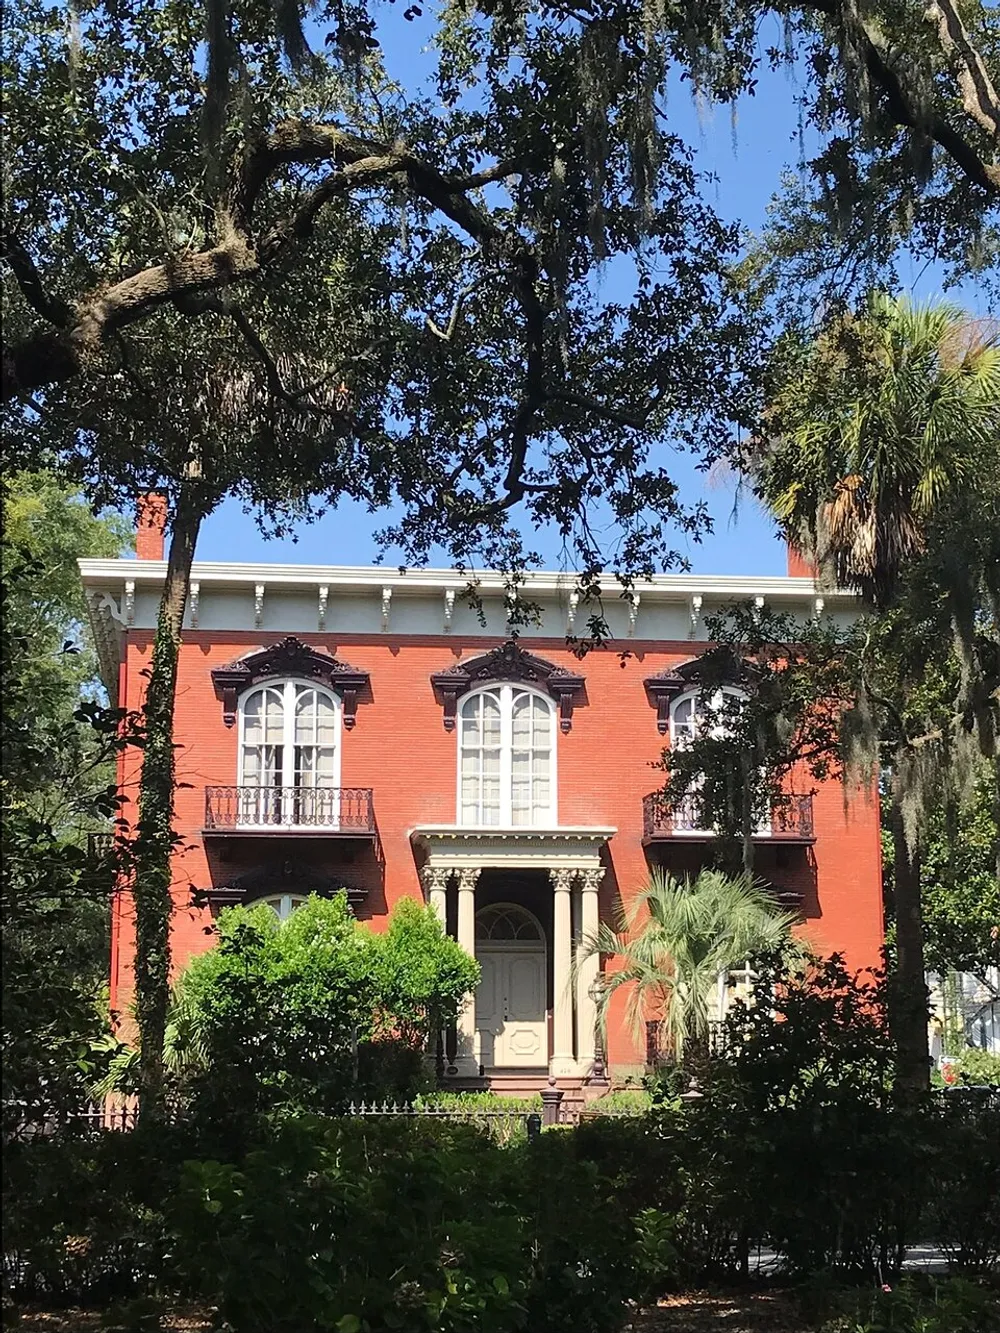 A classic red brick house with white trim balconies and a pillared entrance is nestled amongst lush greenery and trees draped with Spanish moss under a bright blue sky